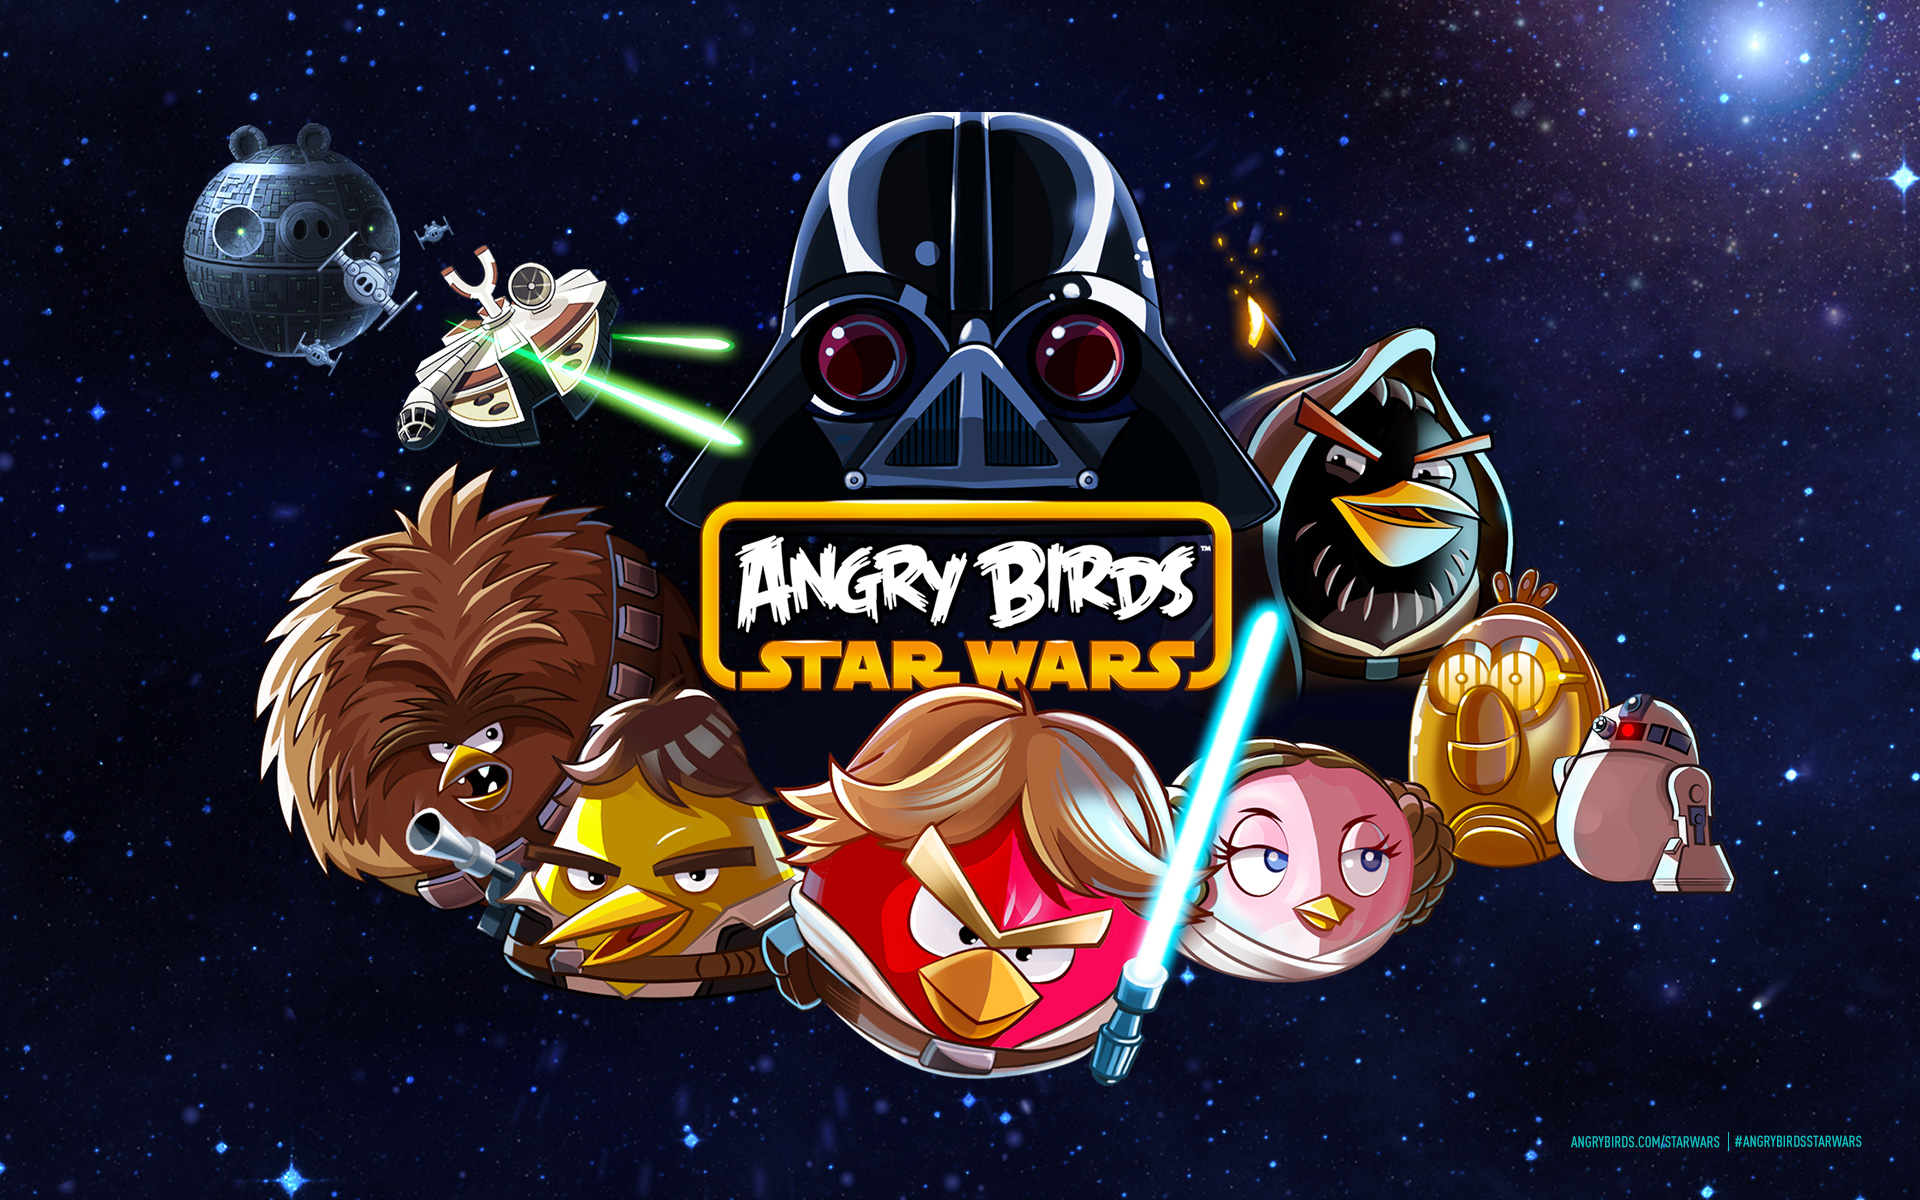 star wars, video game, angry birds, bird, game